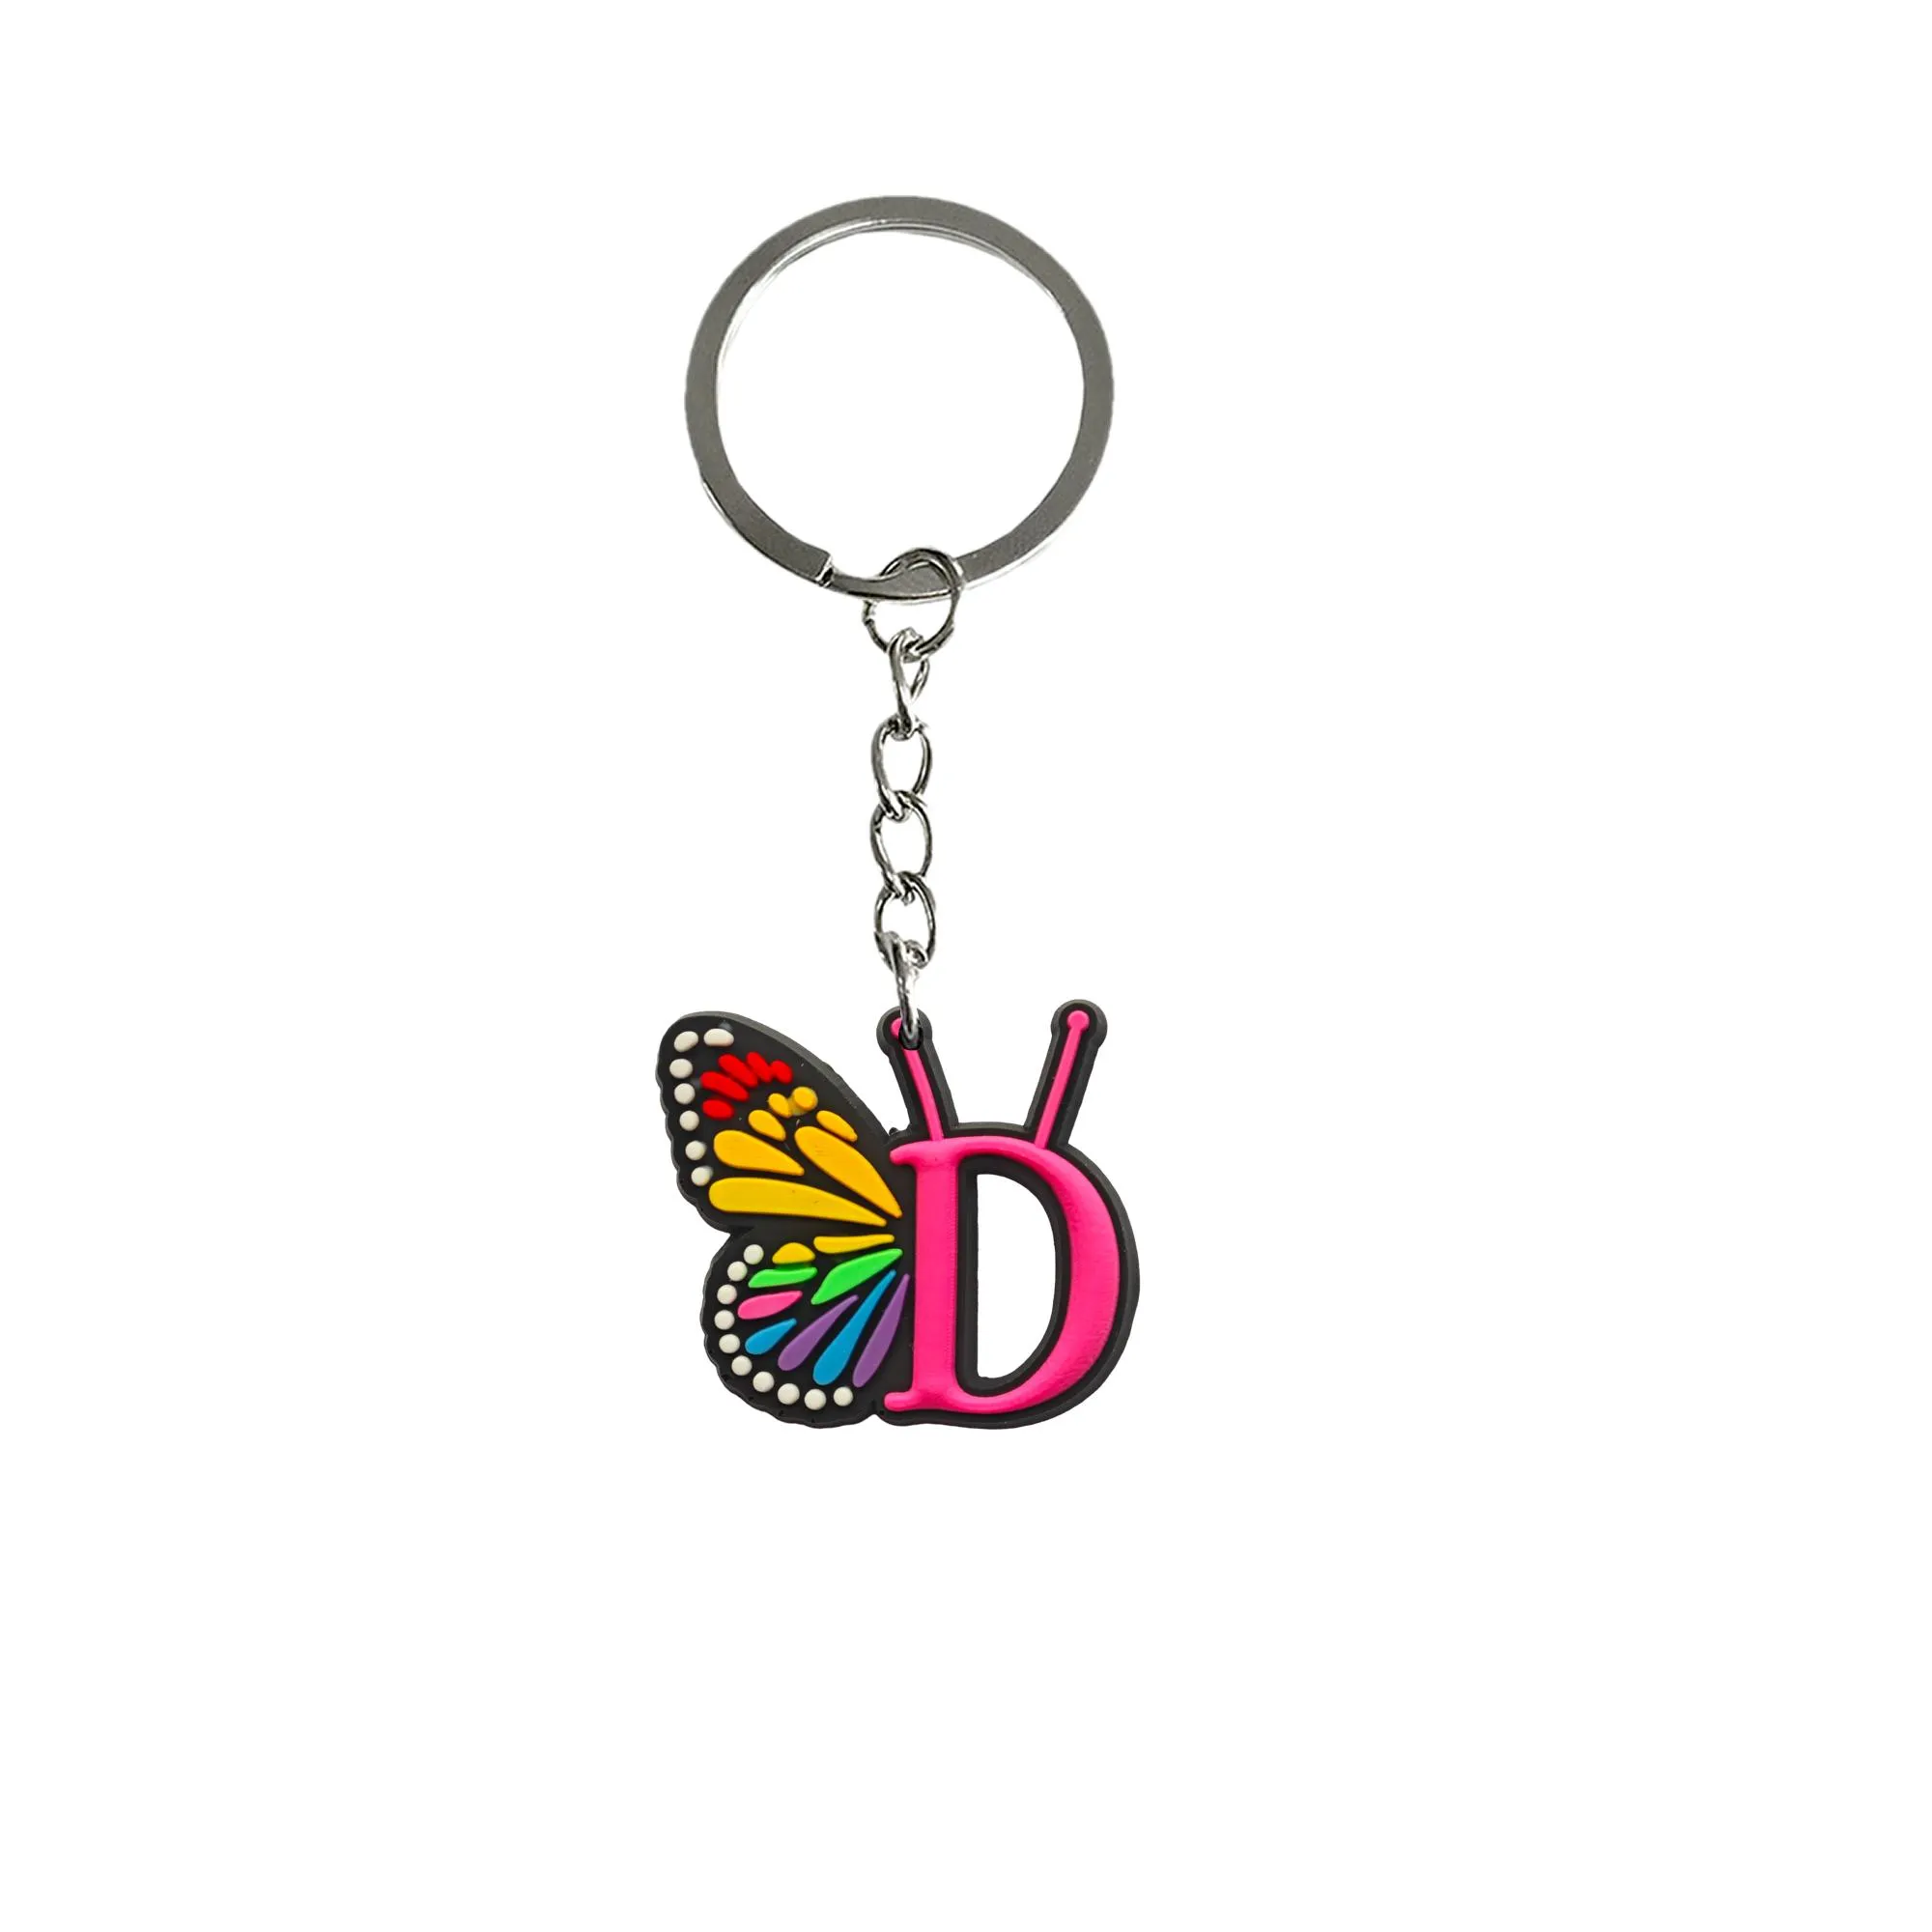 Other Letter Butterfly Keychain Mini Cute Keyring For Classroom Prizes Boys Keychains Key Chain Kid Boy Girl Party Favors Gift Suitabl Otxd3